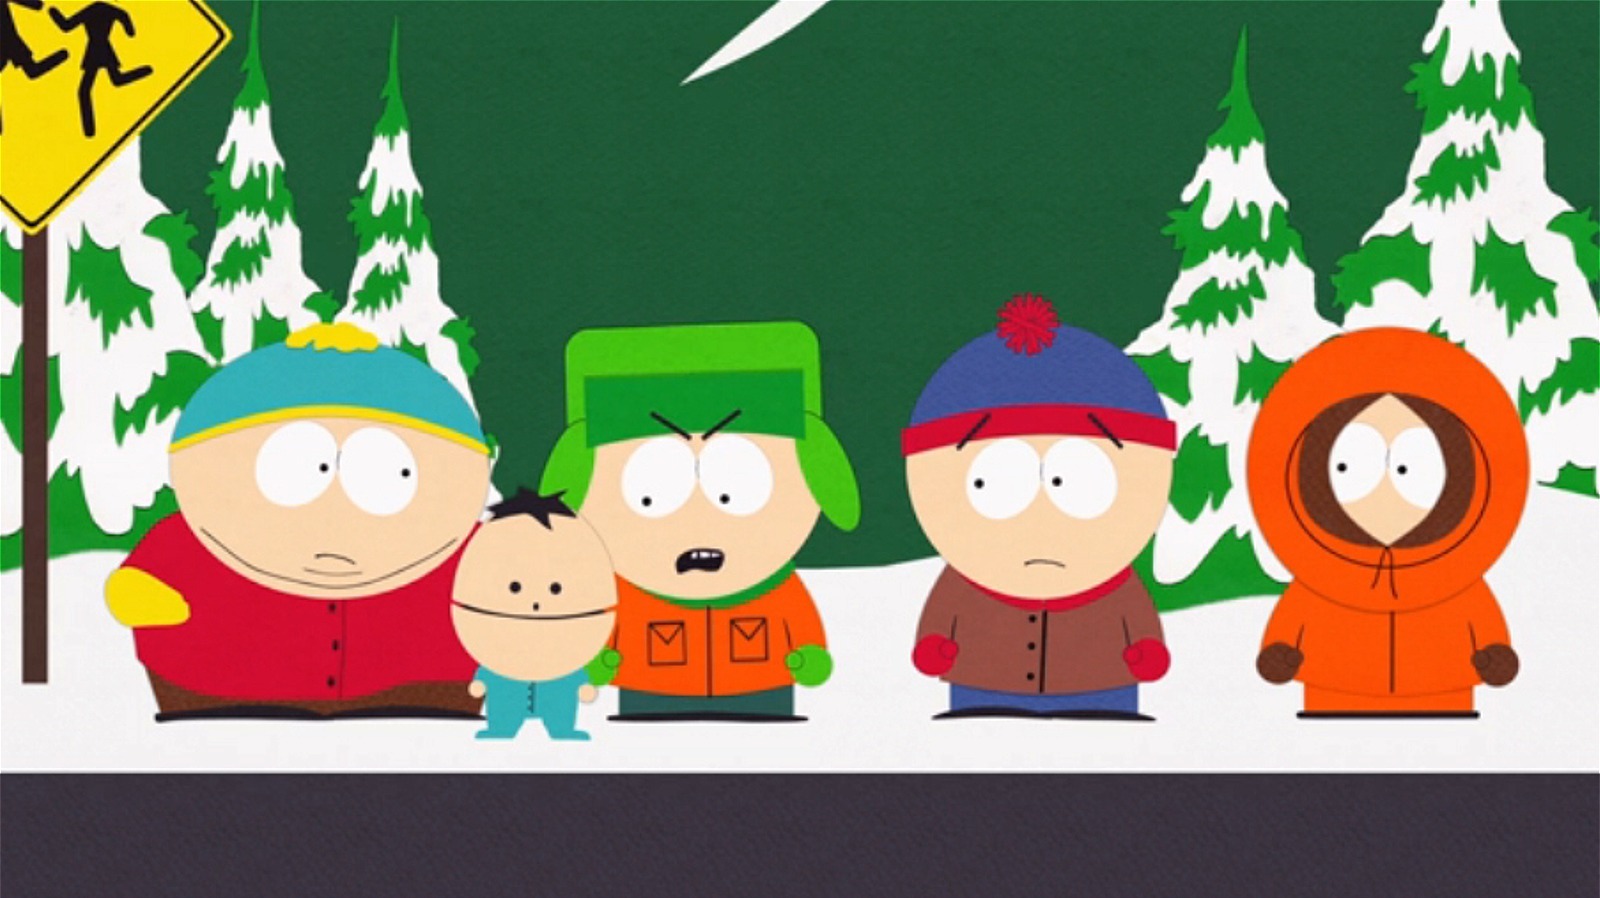 South Park' Cast: Who Does What Voice?